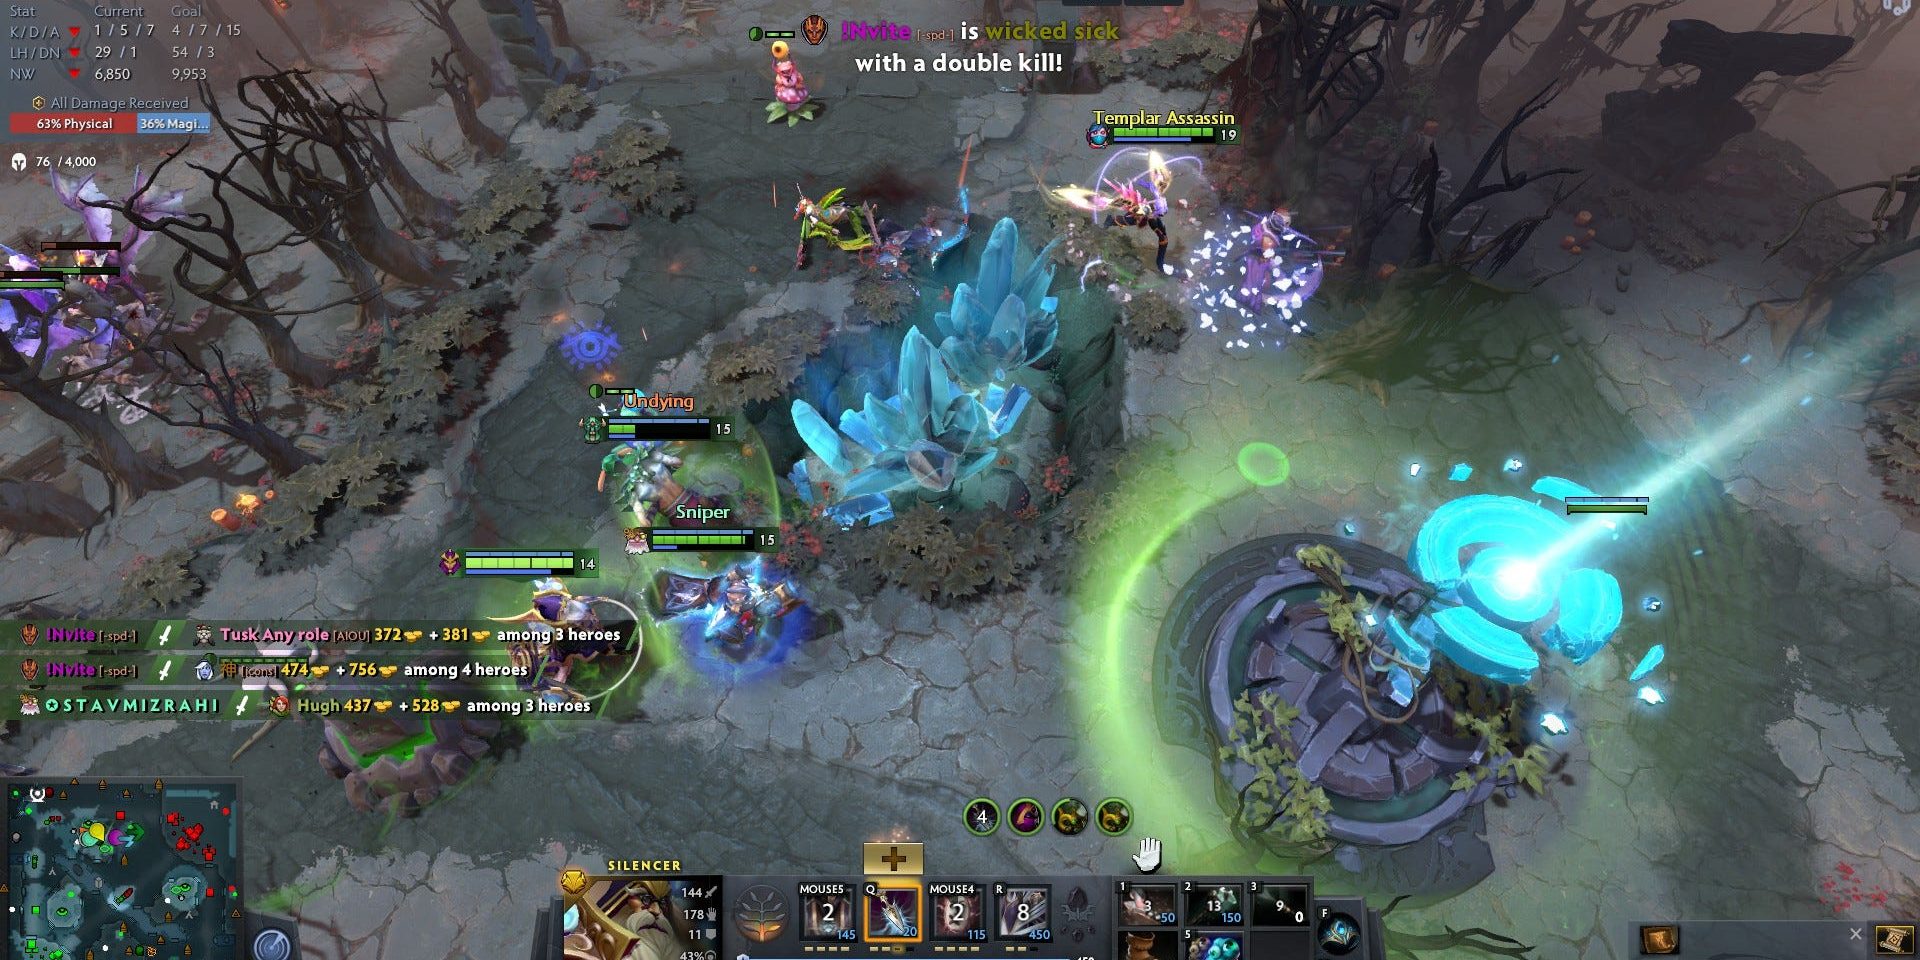 Valve is coming for Dota 2's smurf accounts, and the main accounts behind them